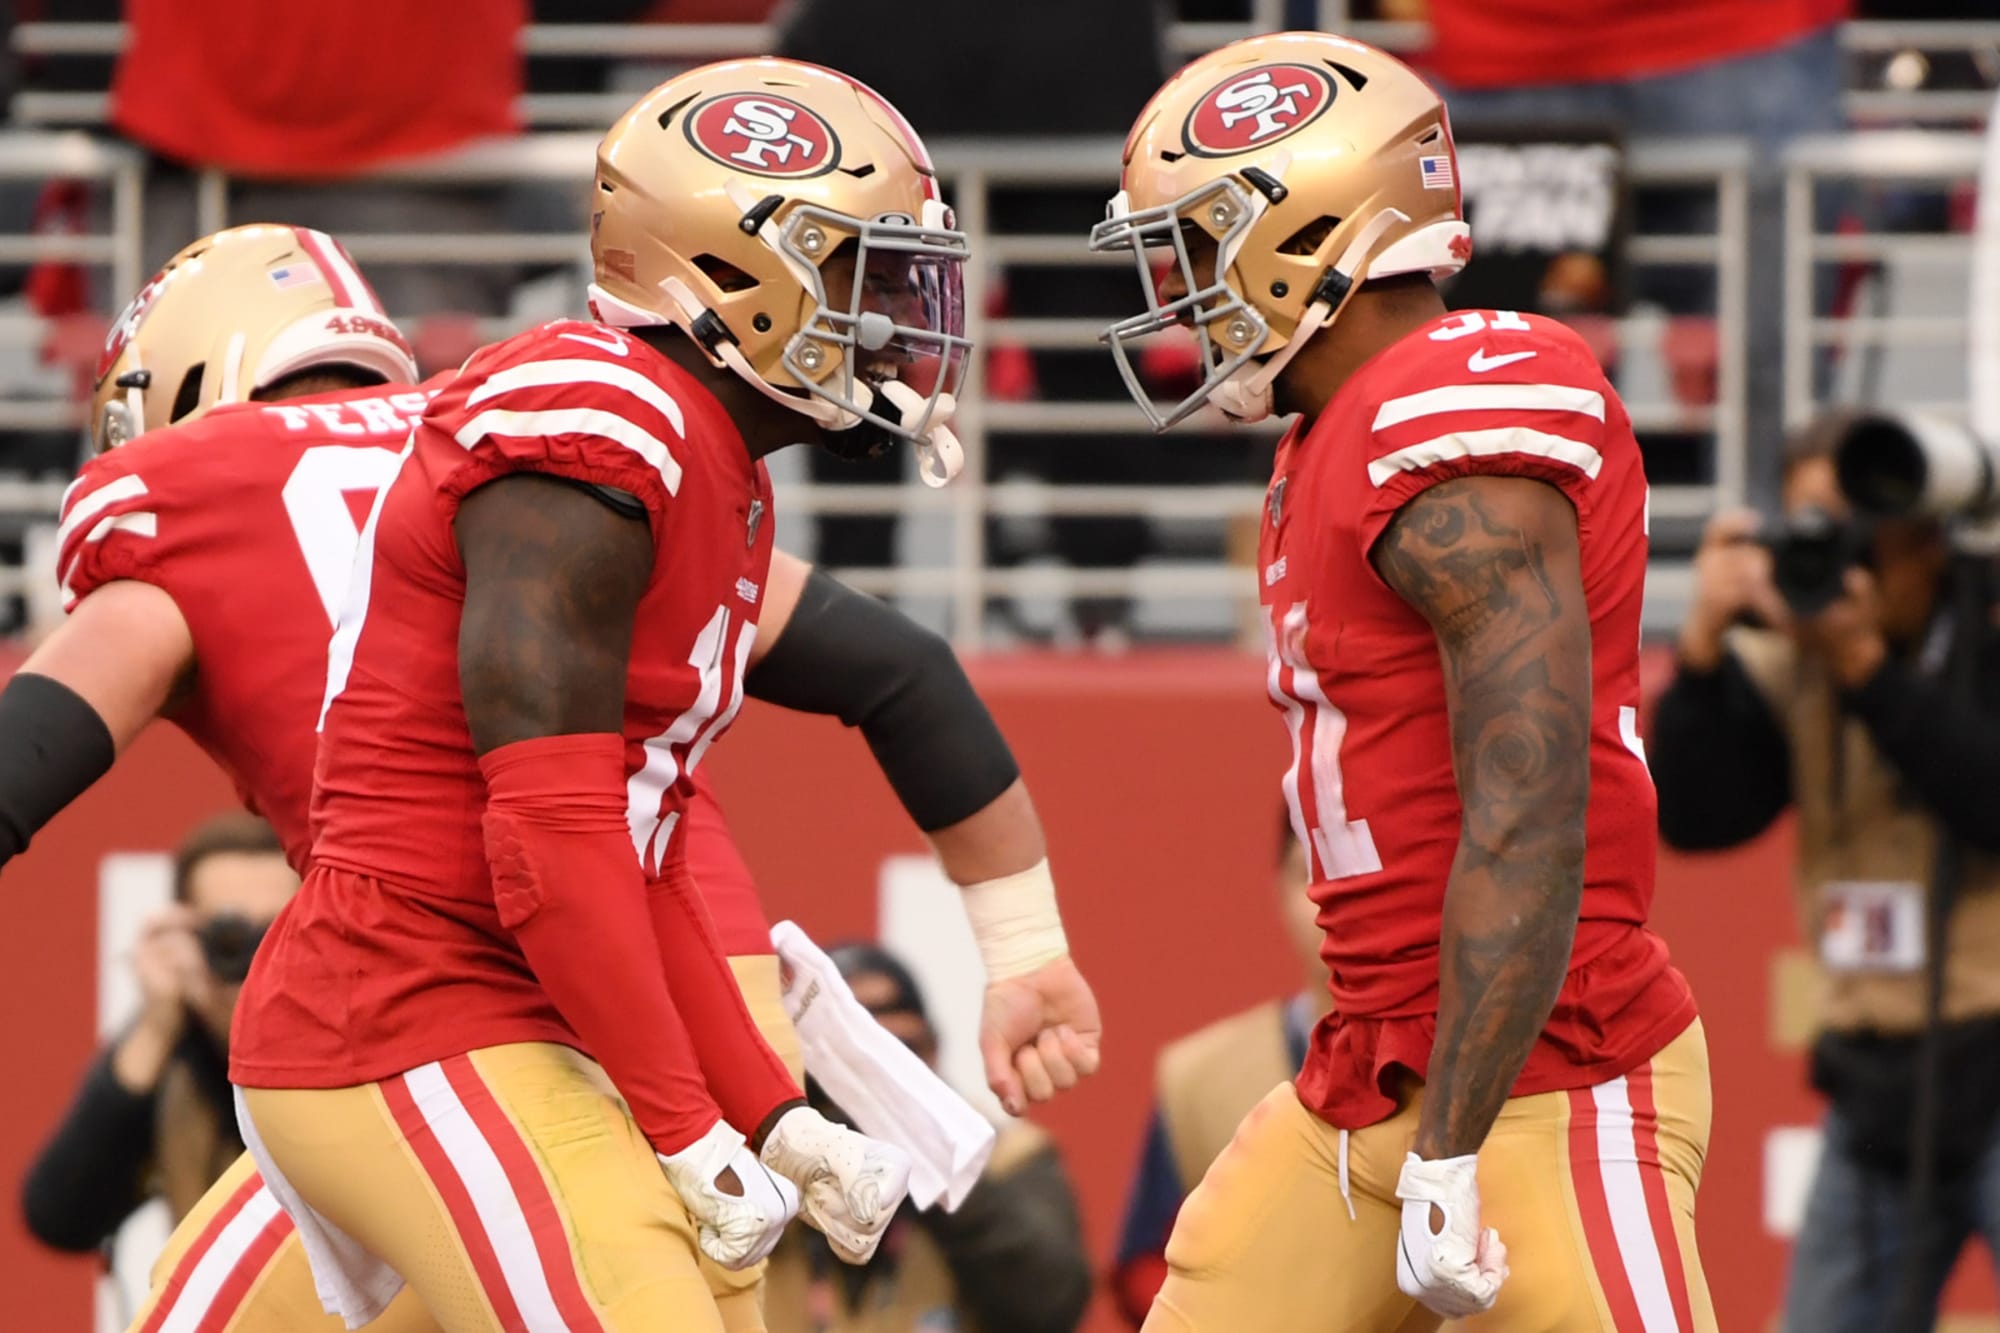 49ers considering extensions for Kendrick Bourne and Raheem Mostert